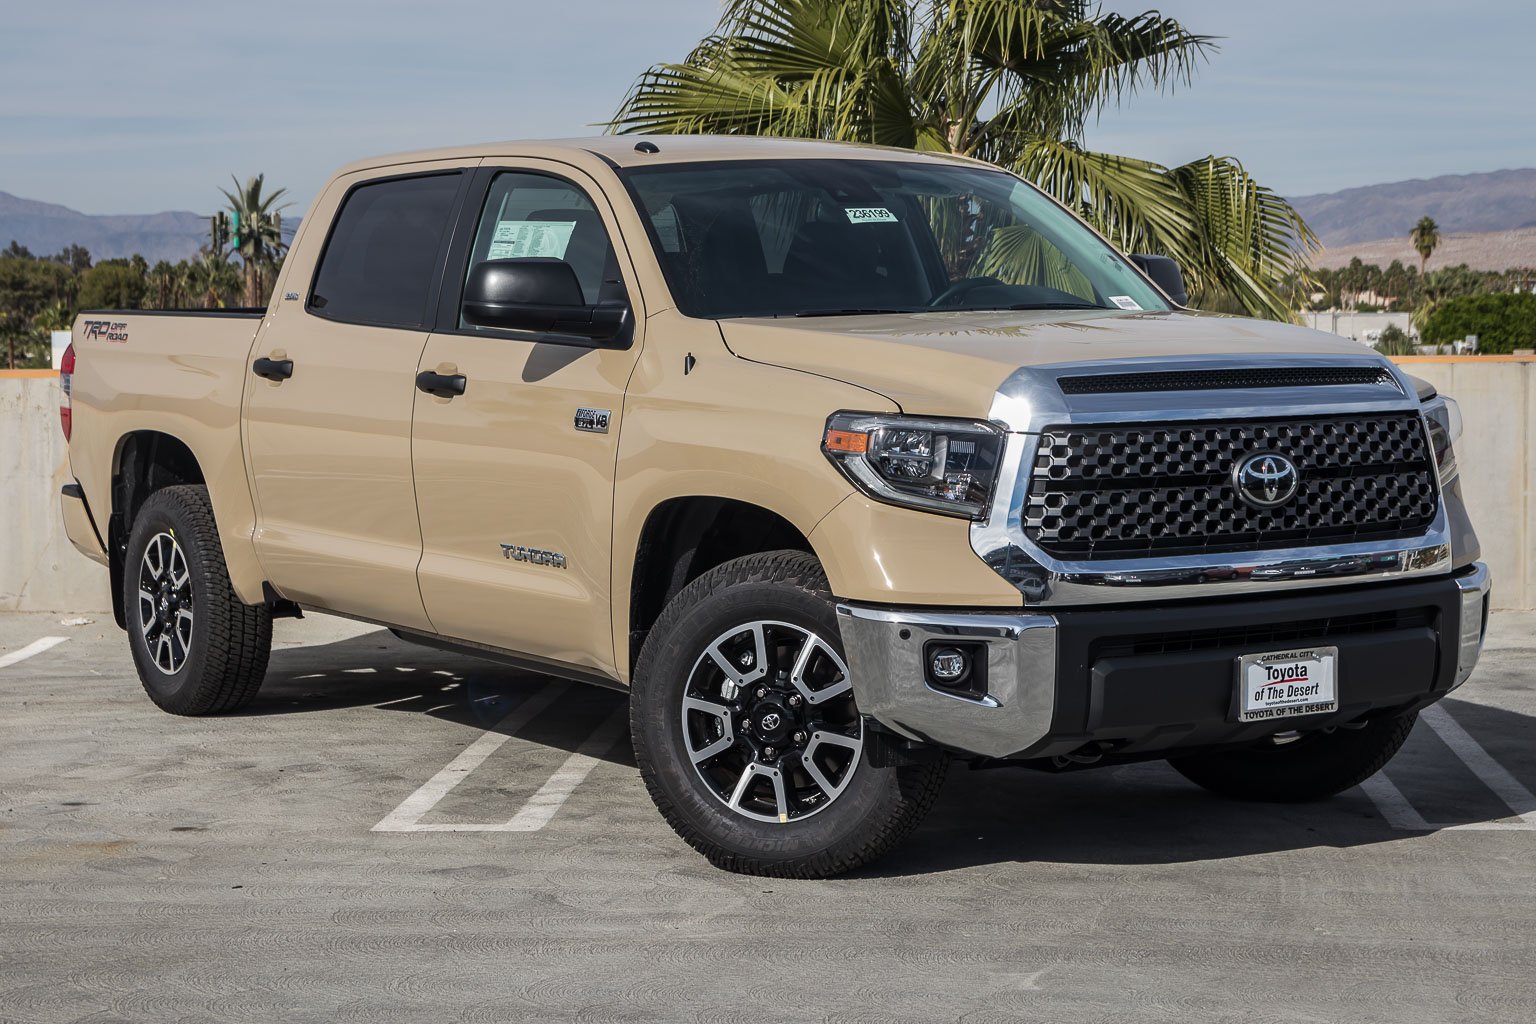 New 2018 Toyota Tundra 2WD SR5 Crew Cab Pickup in Cathedral City